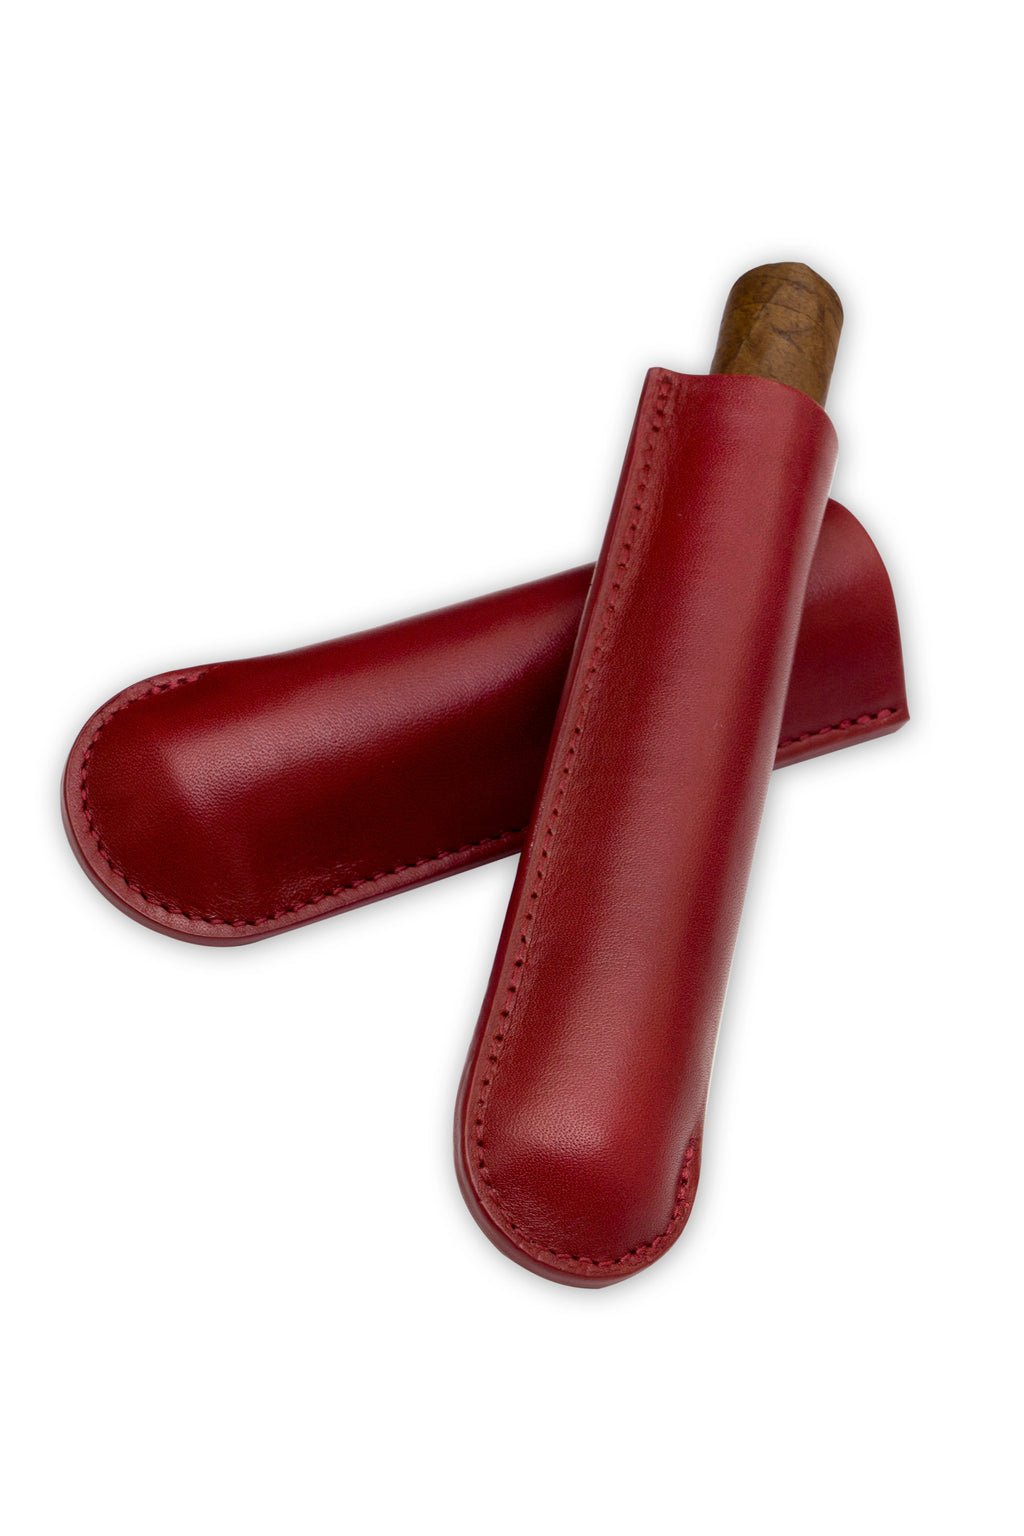 Single-Finger Genuine Leather Cigar Case | Made in the USA